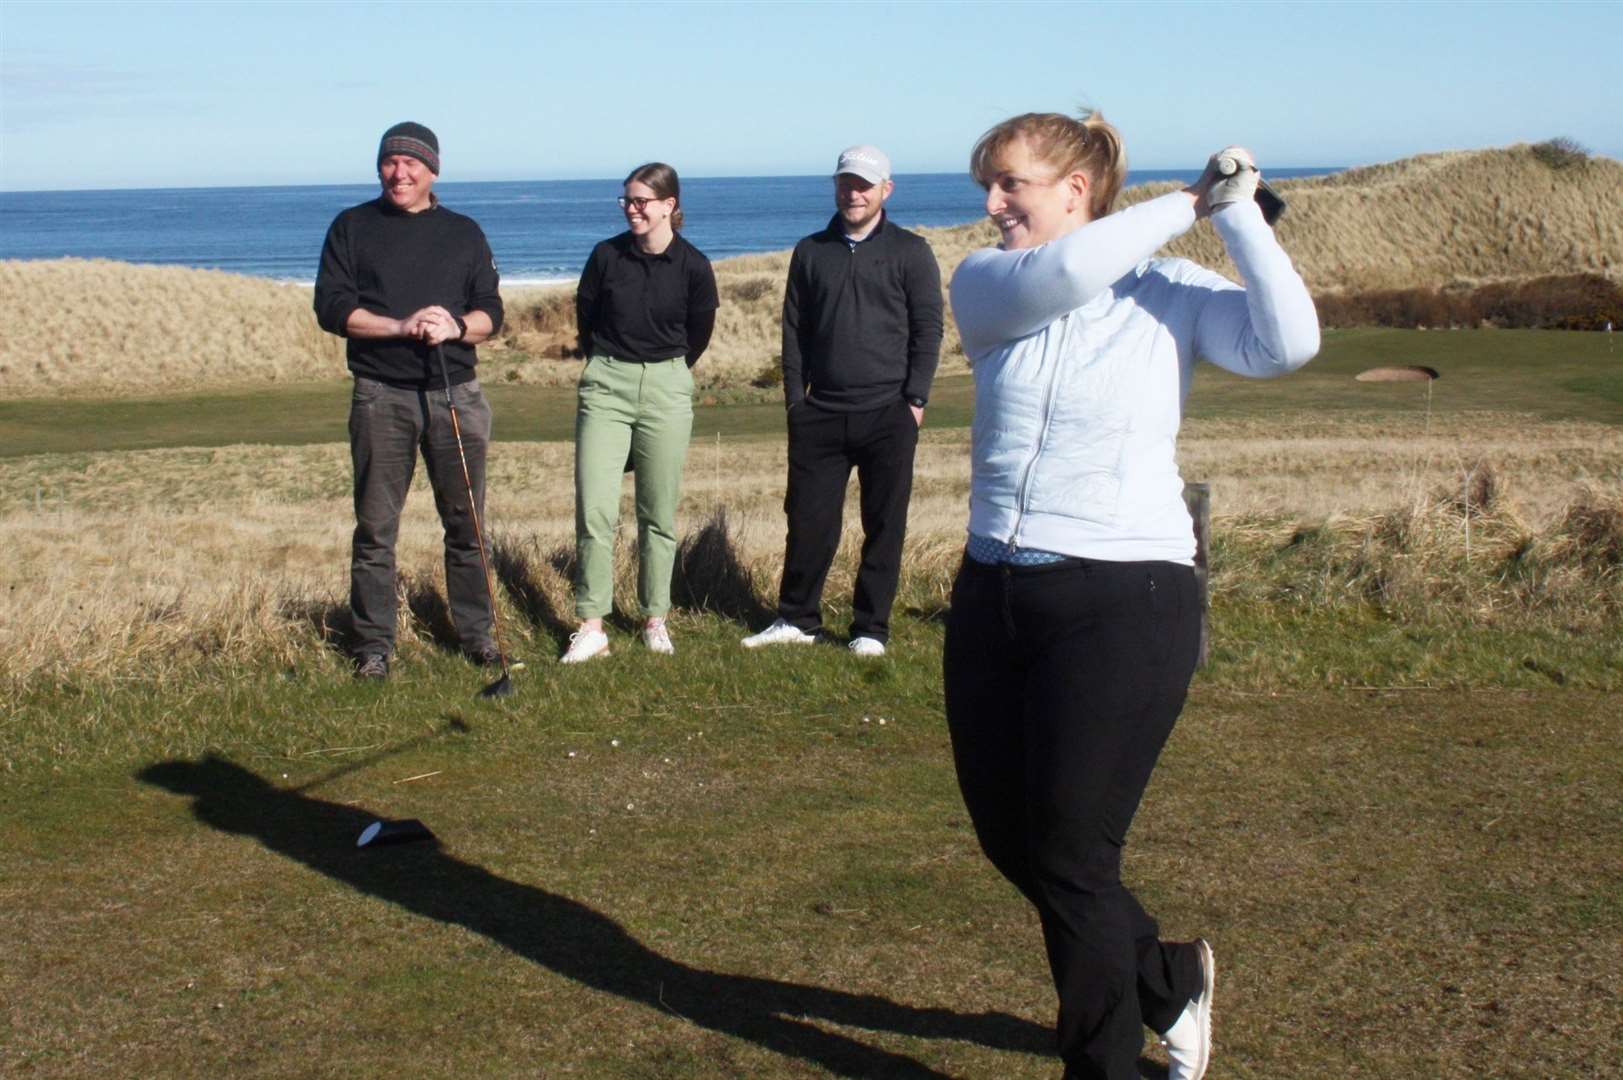 Reay captain Carol Paterson hits the first tee shot of the summer season, while looking on are (from left) Steve Efemey, Rebecca Munro and Jason Norwood.